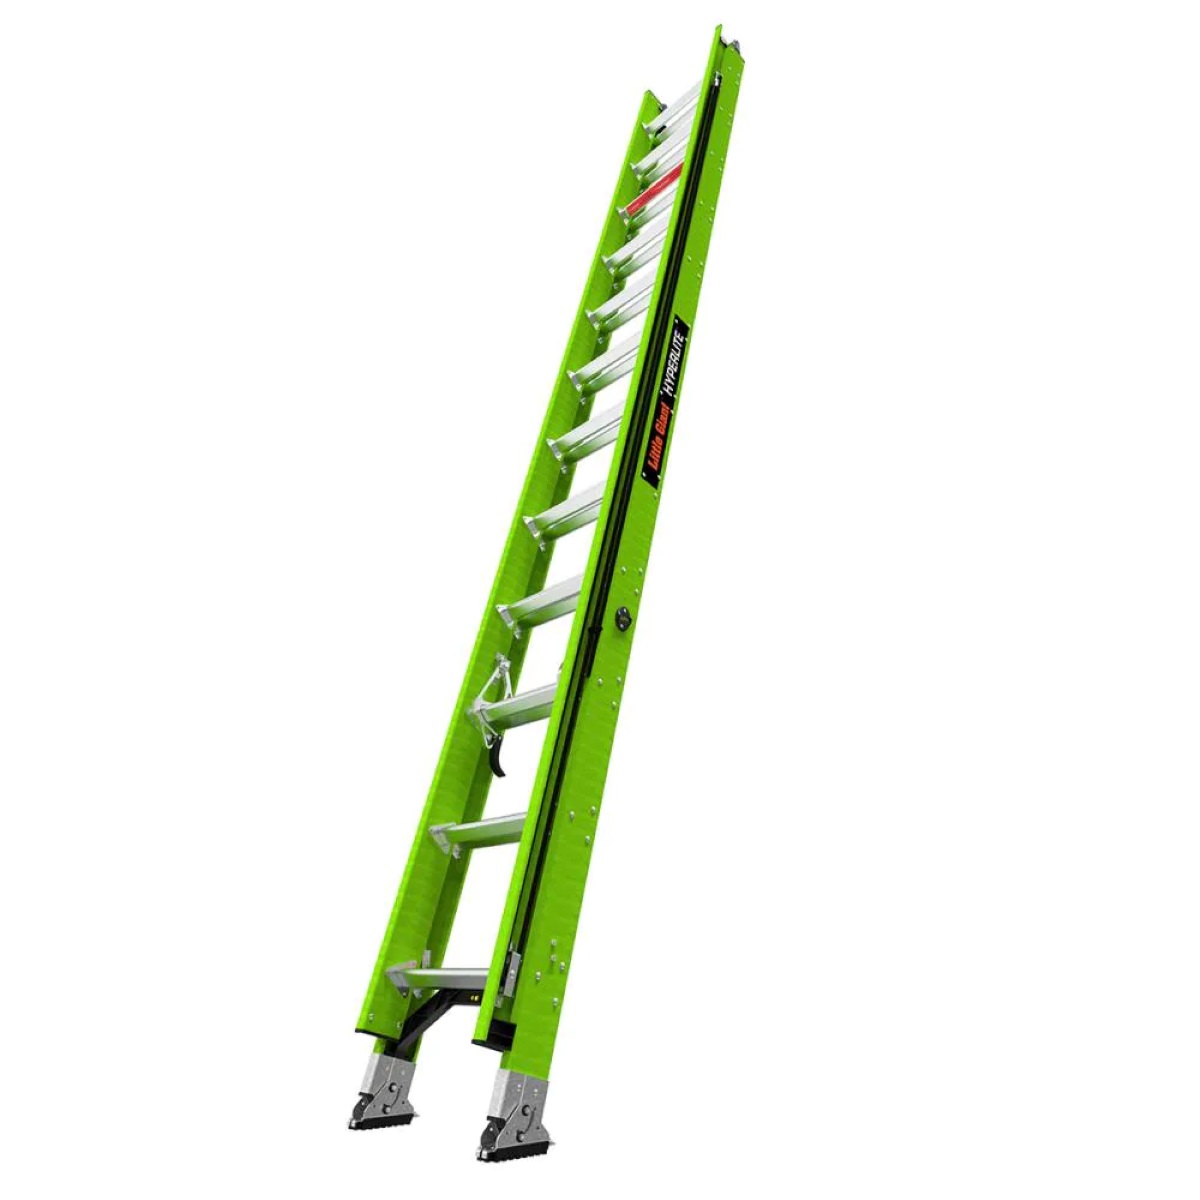 How Much Does A 24 Ft Ladder Weigh